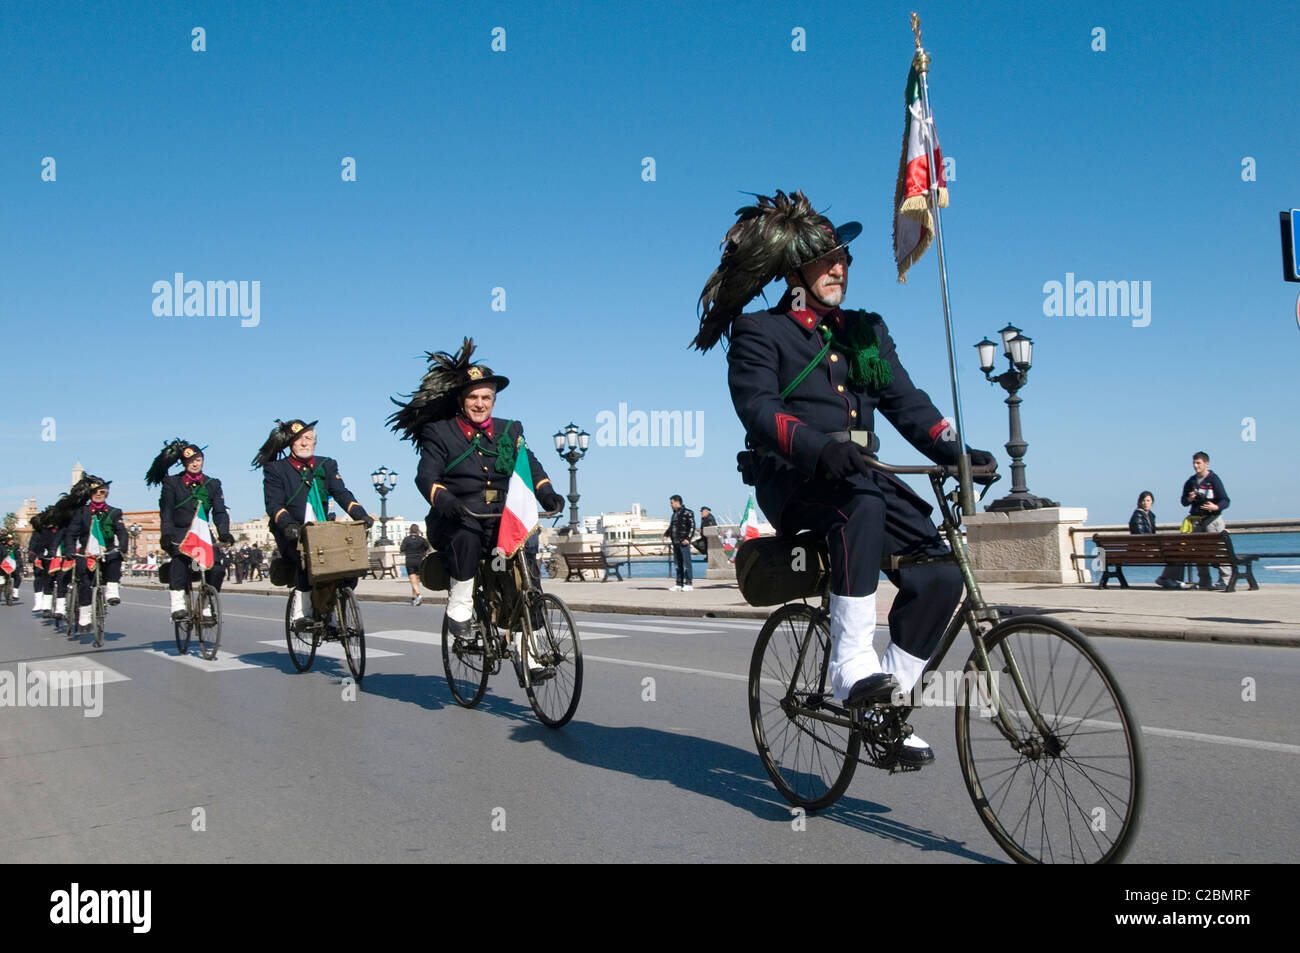 Bersaglieri italian army italy uniform uniforms feathers in hats hat on  style stylish cool riding bikes bike cycle cycles Stock Photo - Alamy